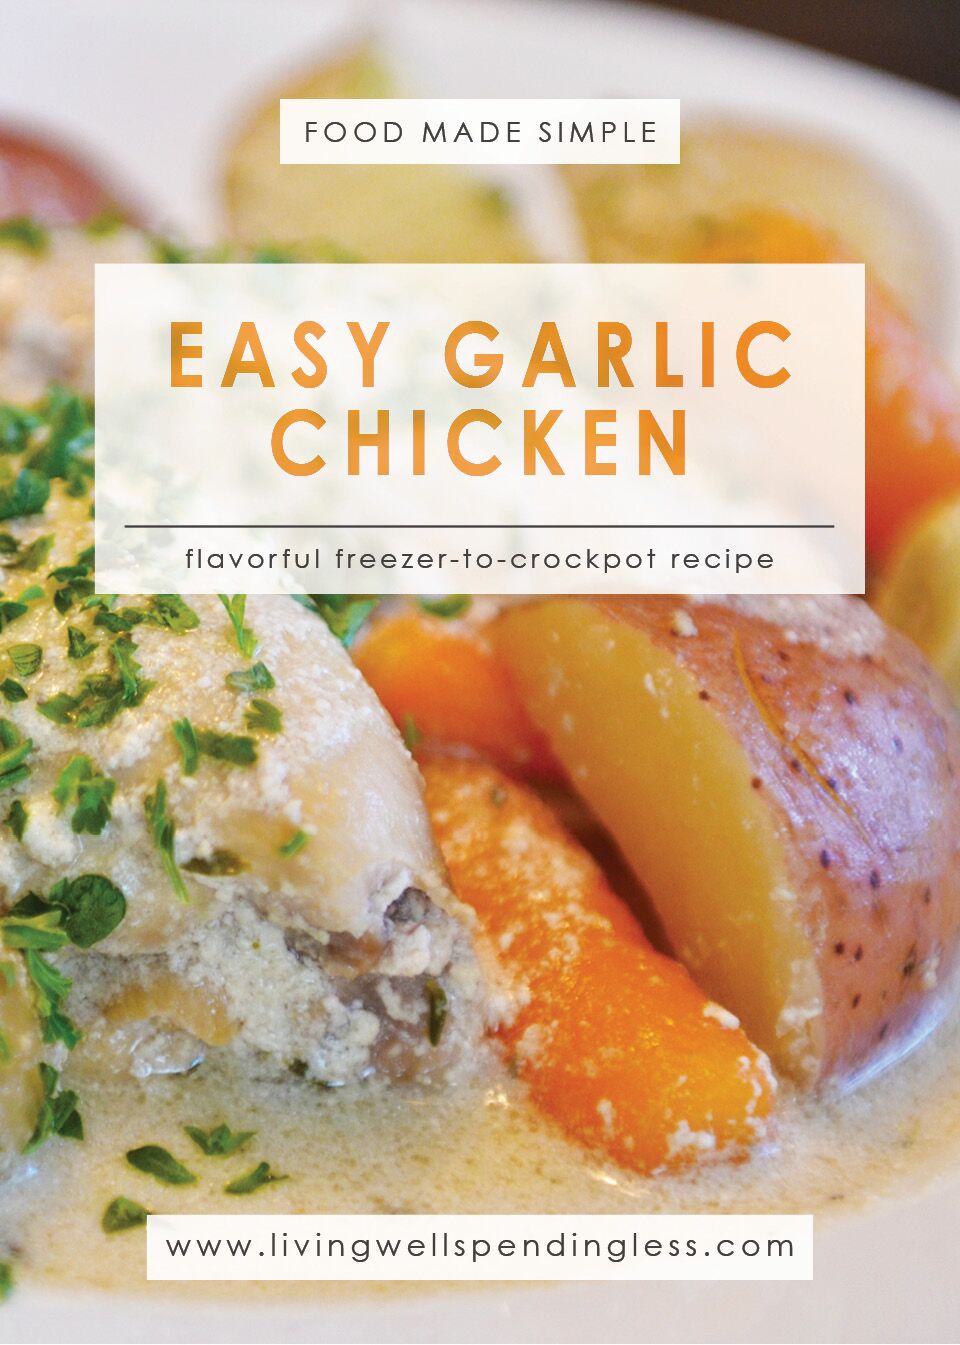 Easy Garlic Chicken | 10 Meals in an Hour | Food Made Simple | Freezer Cooking | Main Course Meat | Chicken Recipes